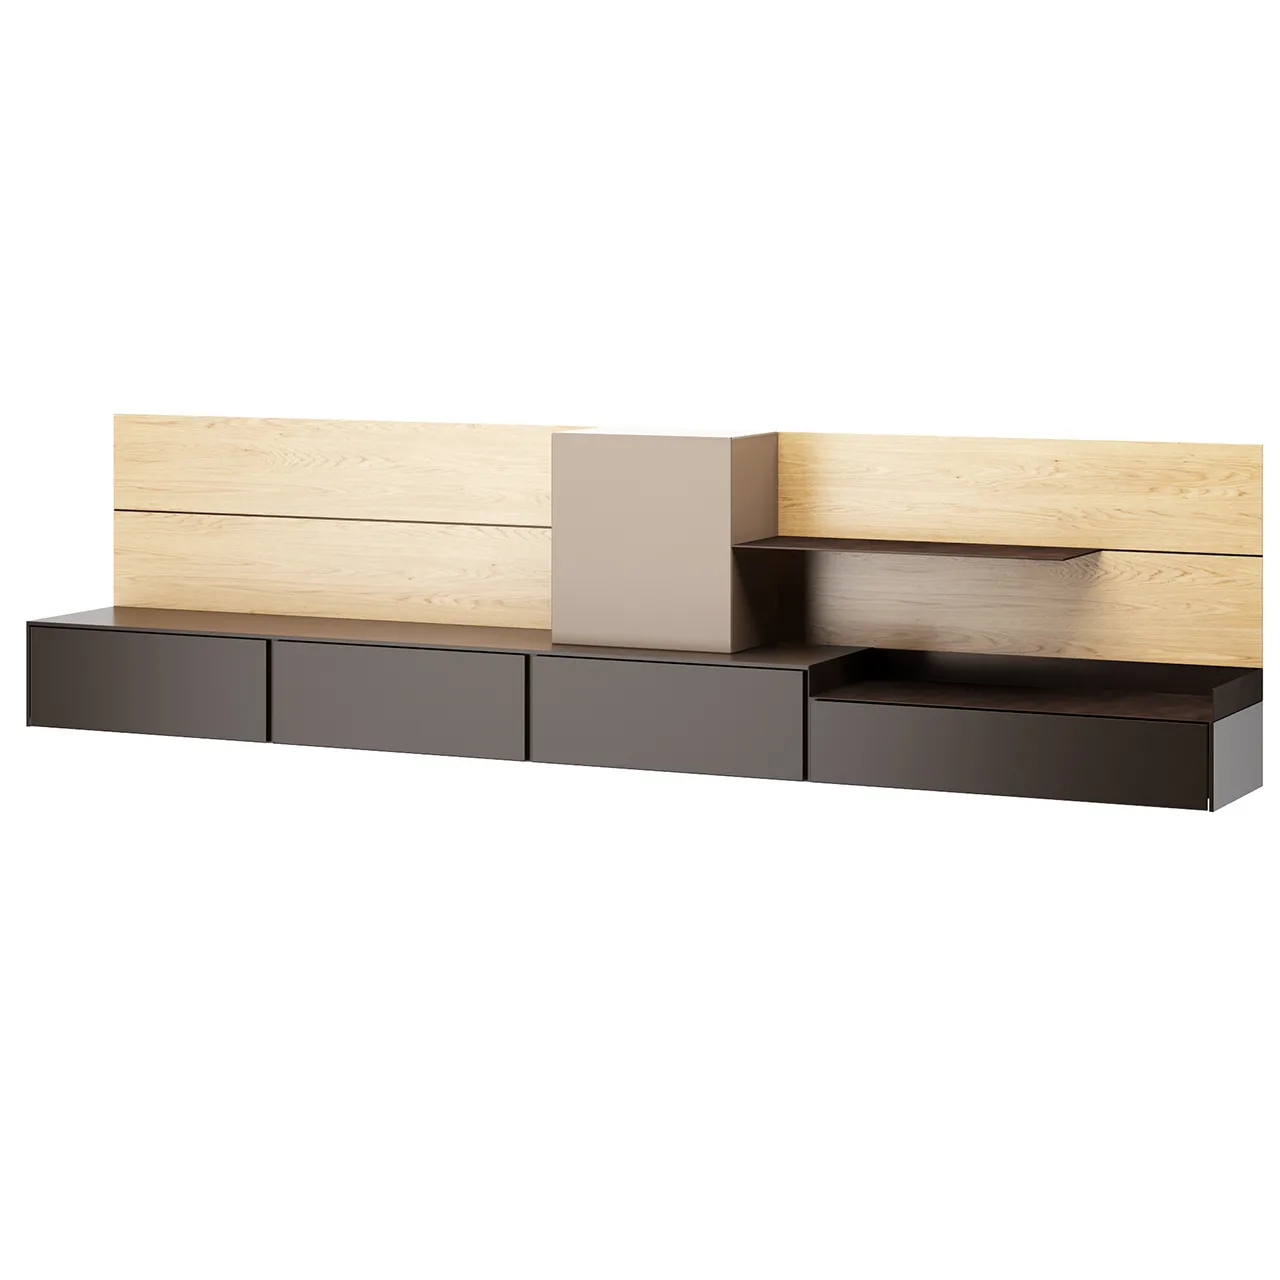 Furniture – avenue-tv-stand-380-l-by-md-house